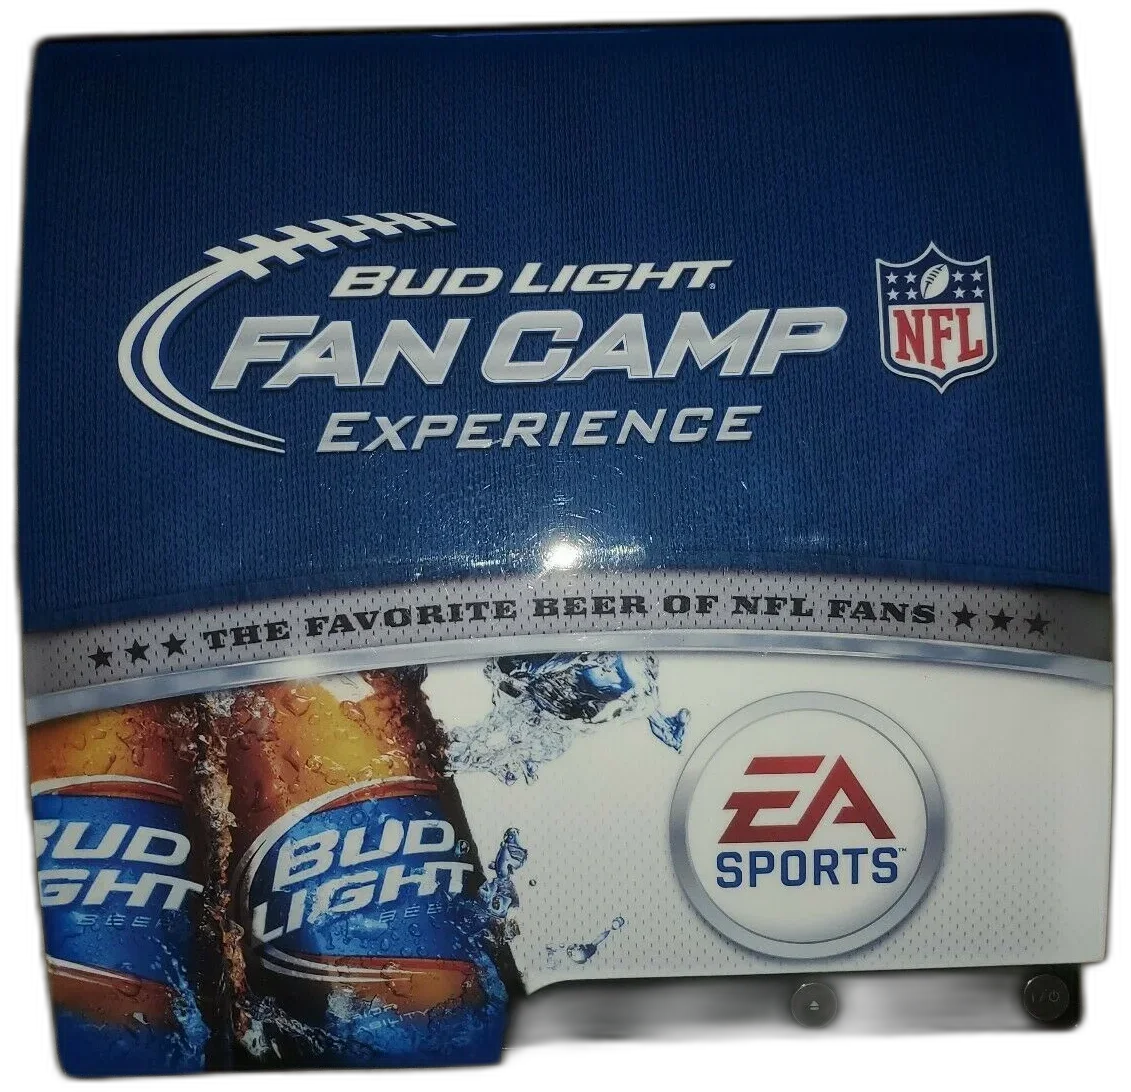  Sony PlayStation 3 Slim Bud Light Fan Camp Experience Console